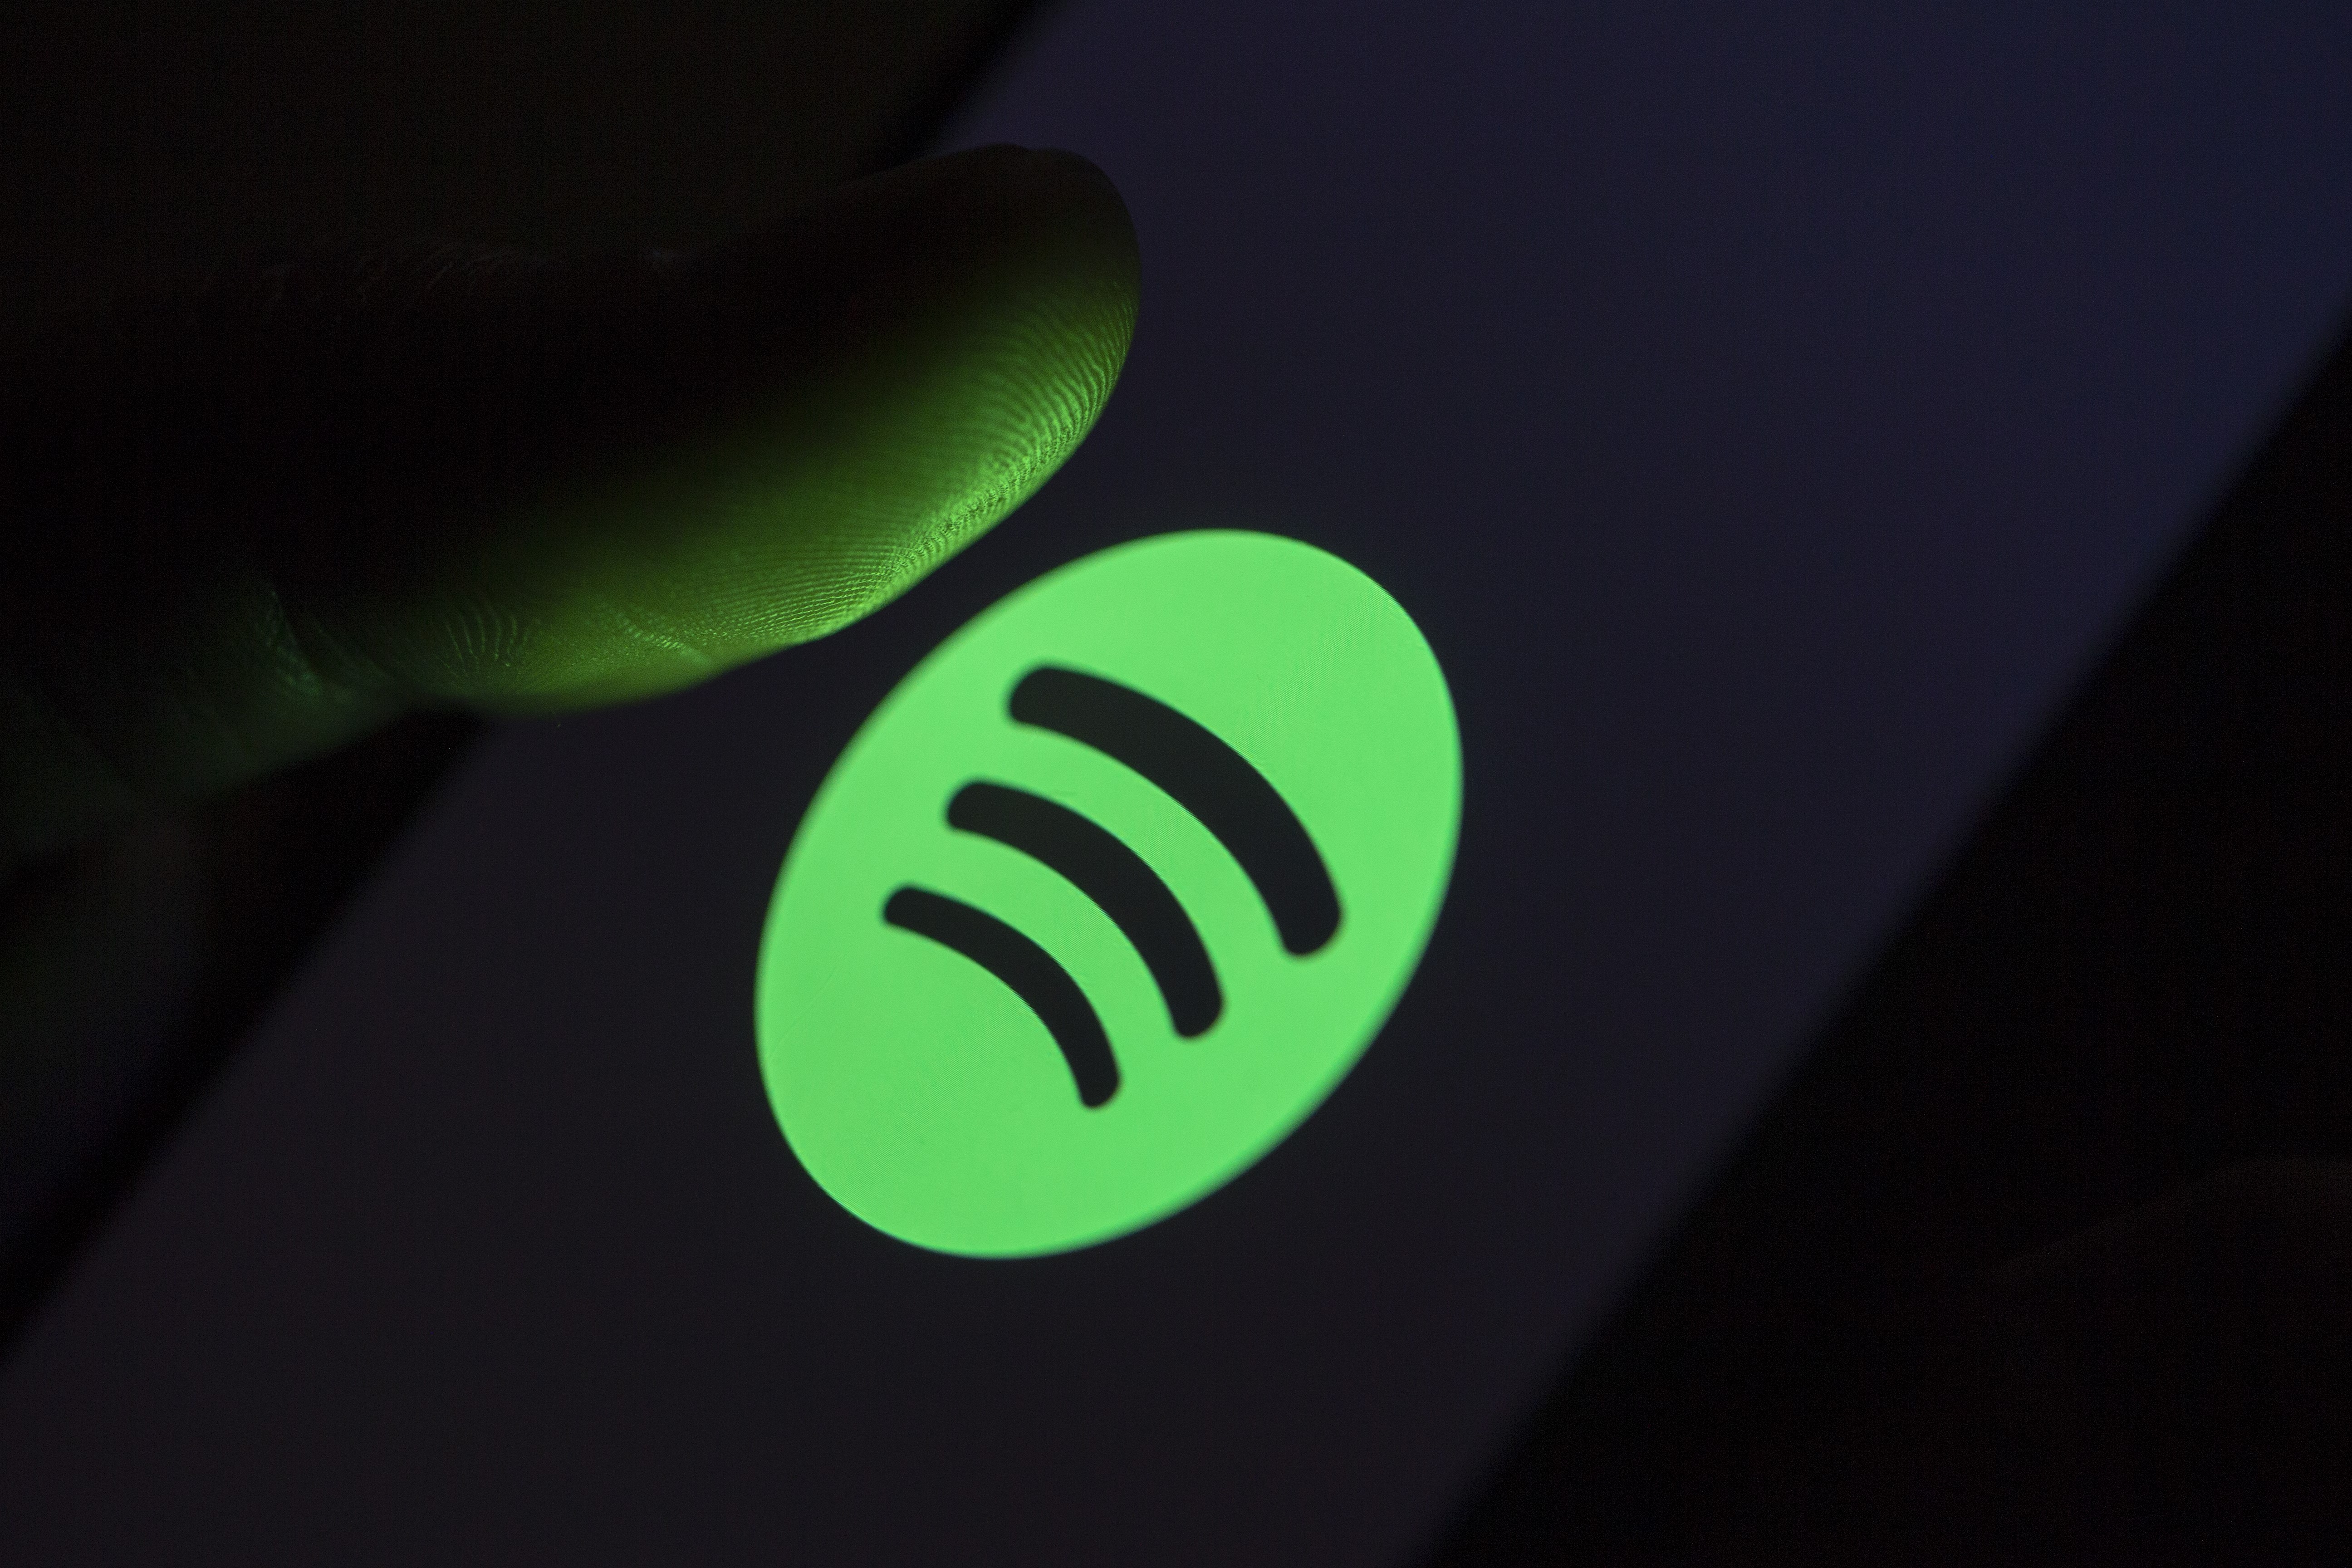 Spotify logo displayed on a smart phone